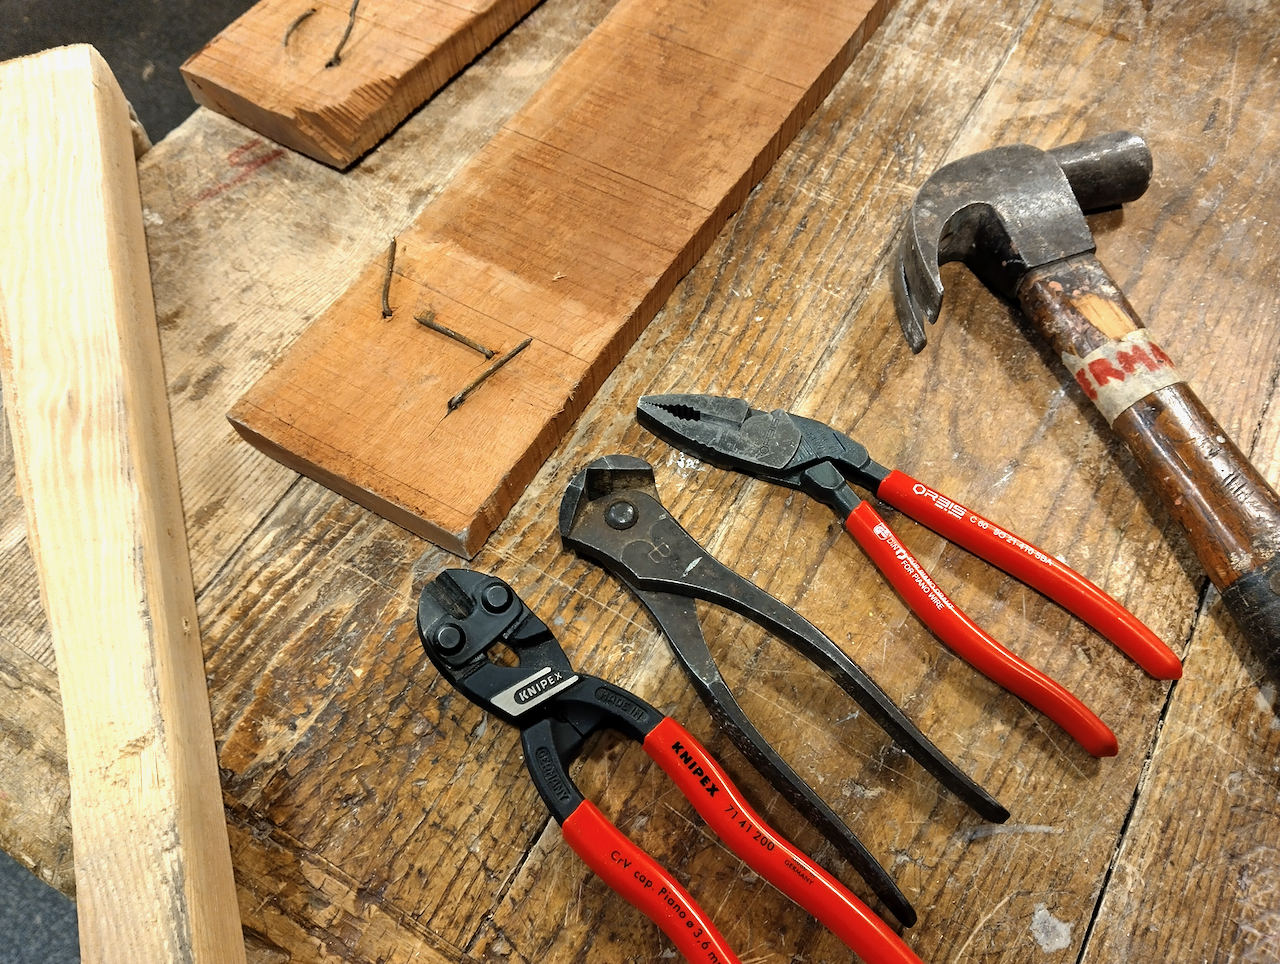 A hammer nippers, and pliers lying in front of a reclaimed board.